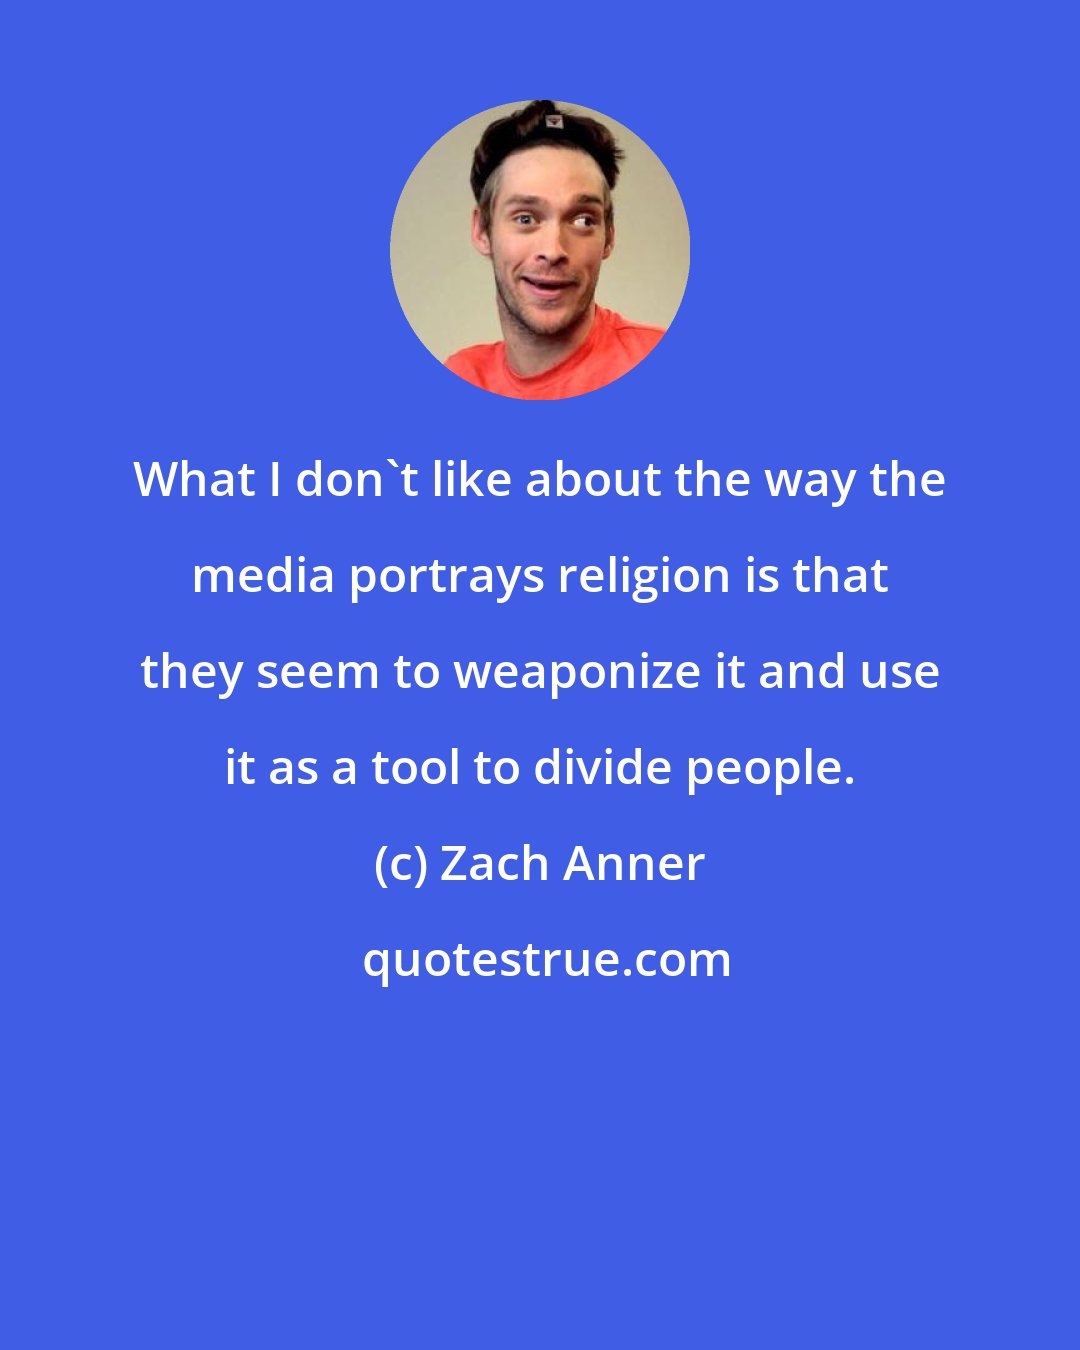 Zach Anner: What I don't like about the way the media portrays religion is that they seem to weaponize it and use it as a tool to divide people.